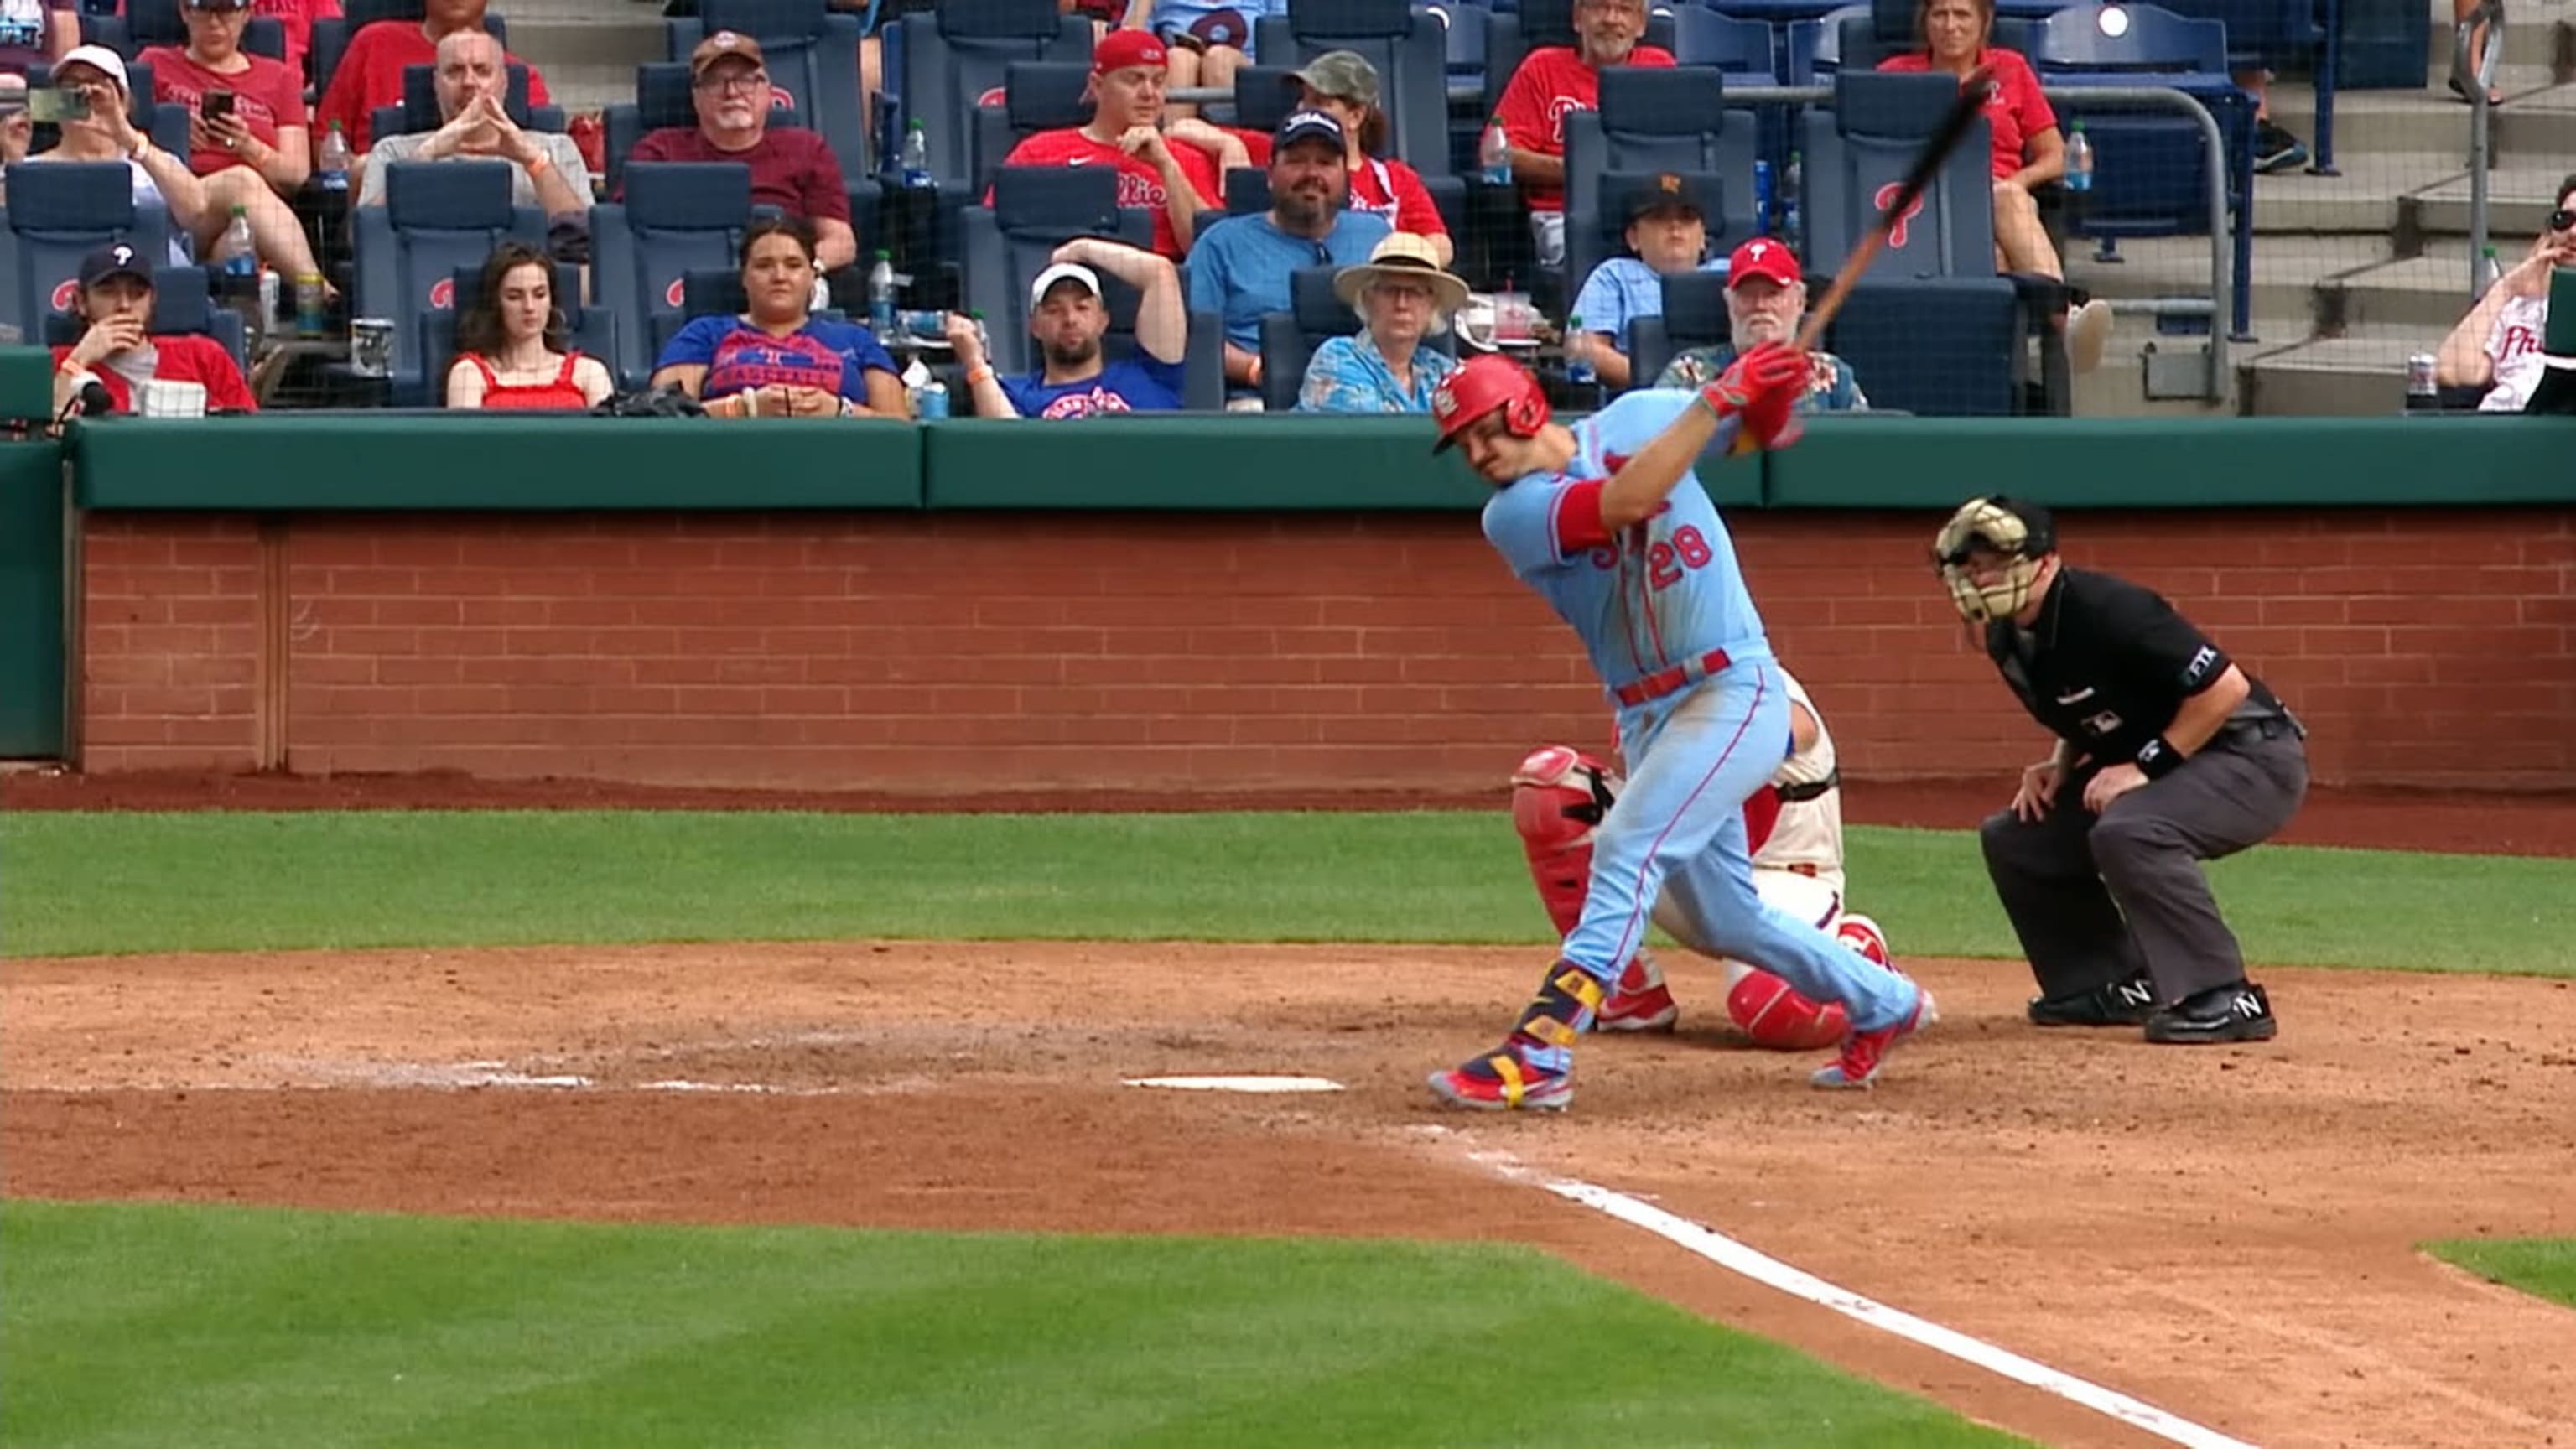 Arenado, Cards hit 4 straight HRs in 1st; late HR tops Phils